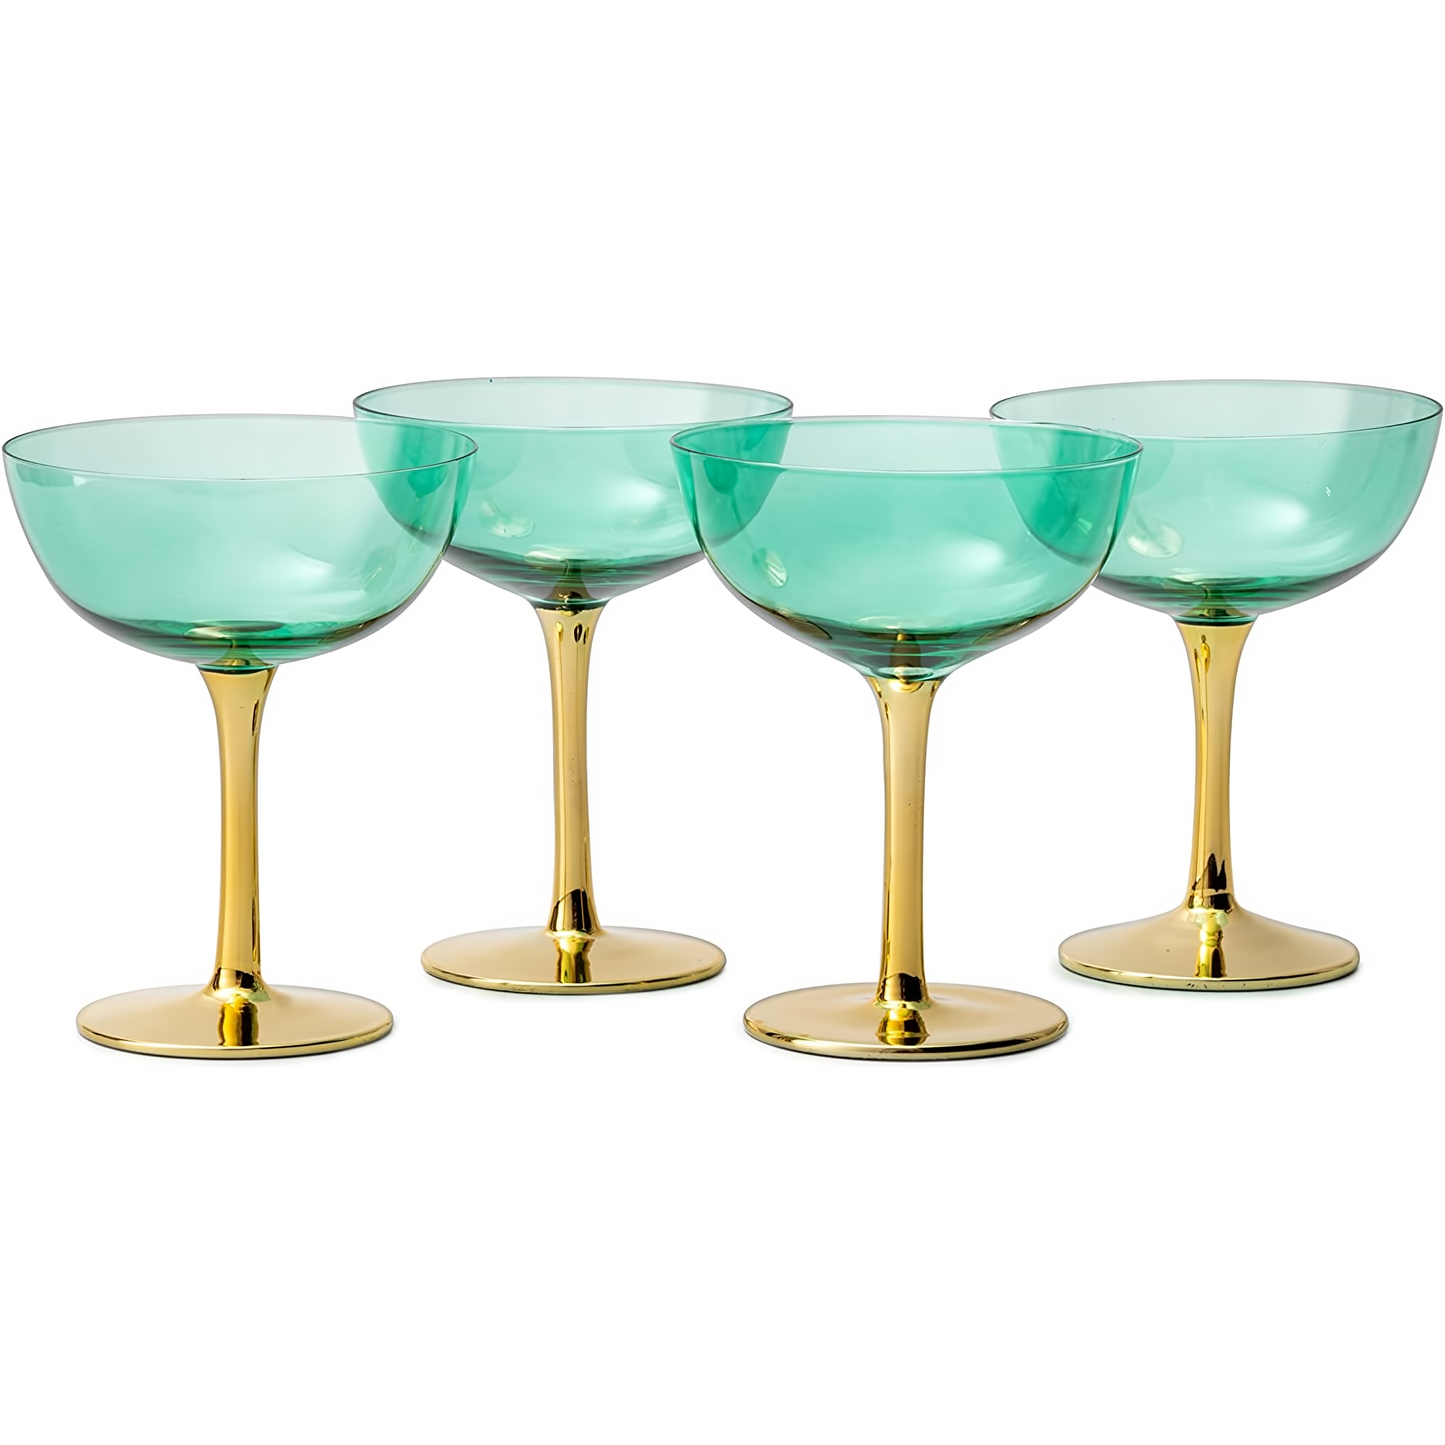 Colored Coupe Art Deco Glasses, Gold | Set of 4 | 12 oz Classic Cocktail Glassware for Champagne, Martini, Manhattan, Sidecar, Crystal Speakeasy Style Goblets Stems, Elegantly Vintage Blue by The Wine Savant